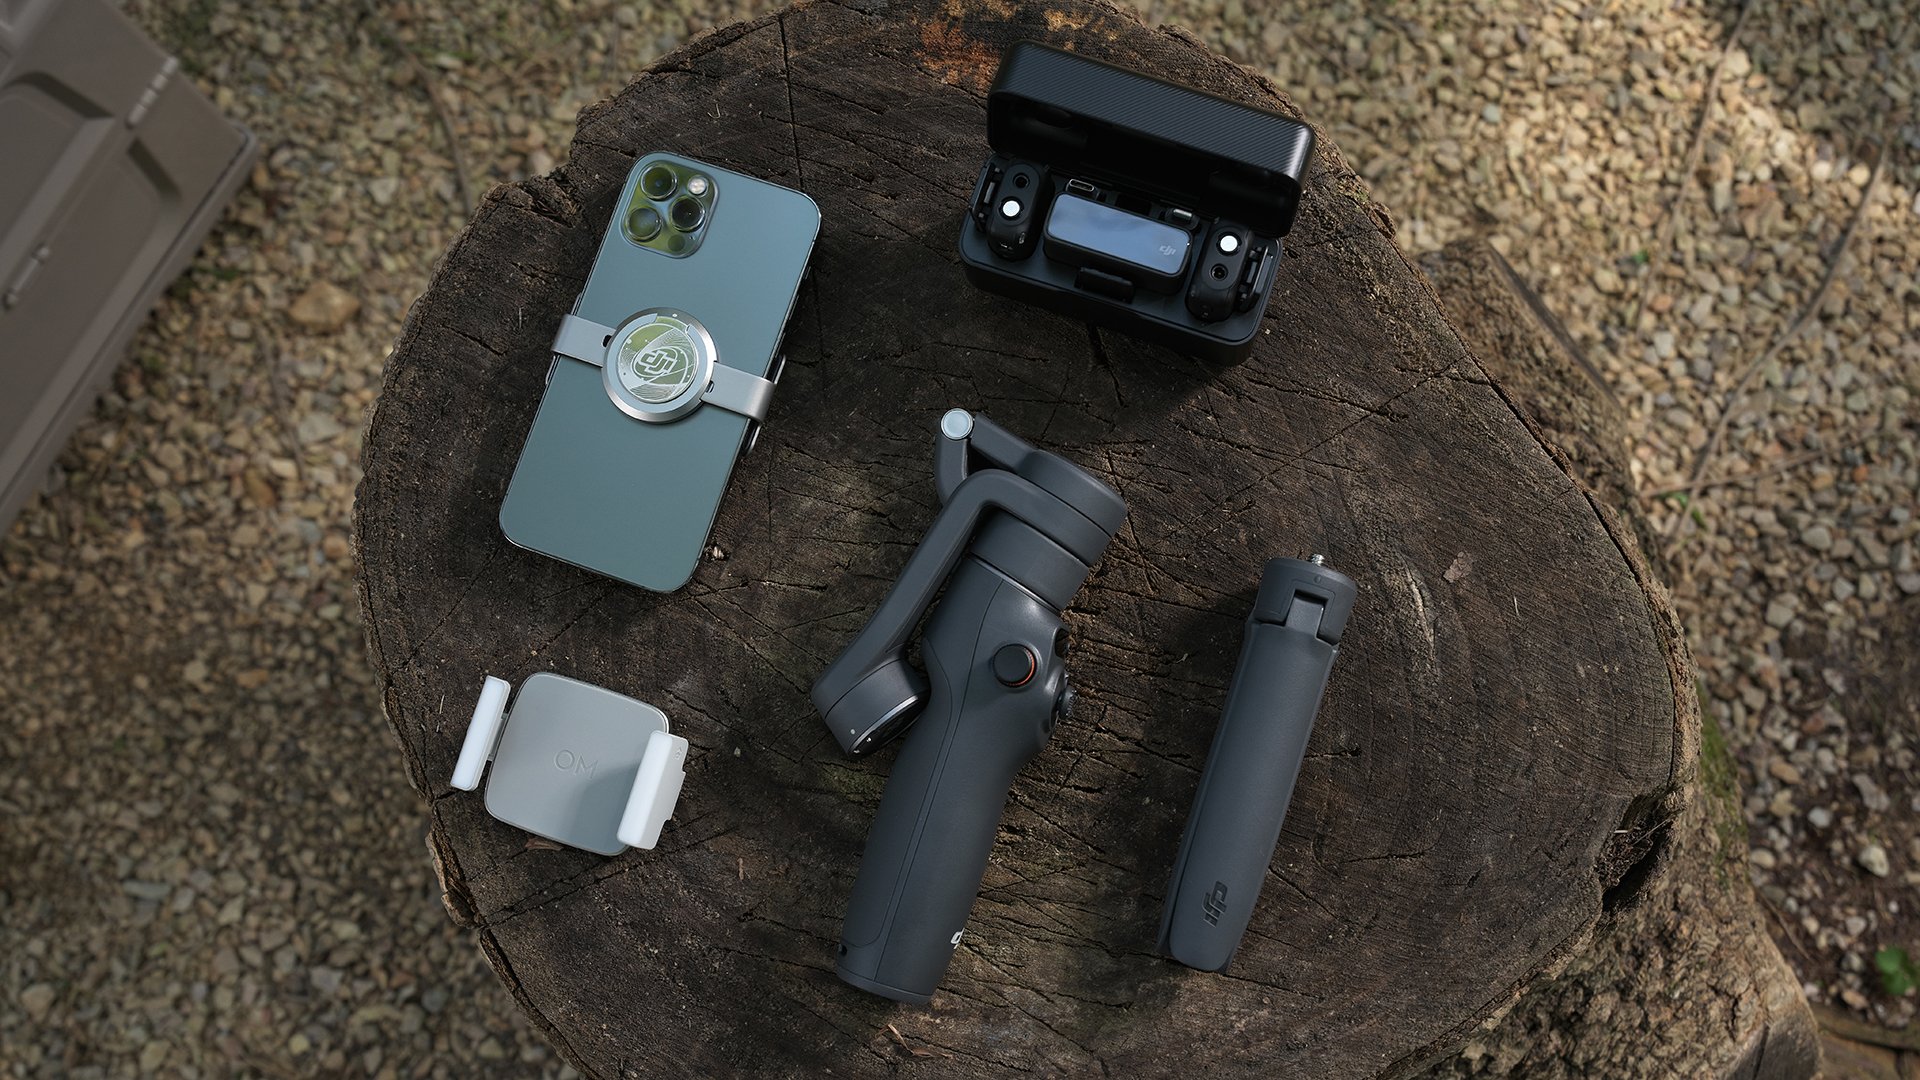 DJI Osmo Mobile 6 promises smooth smartphone video for a lot of money